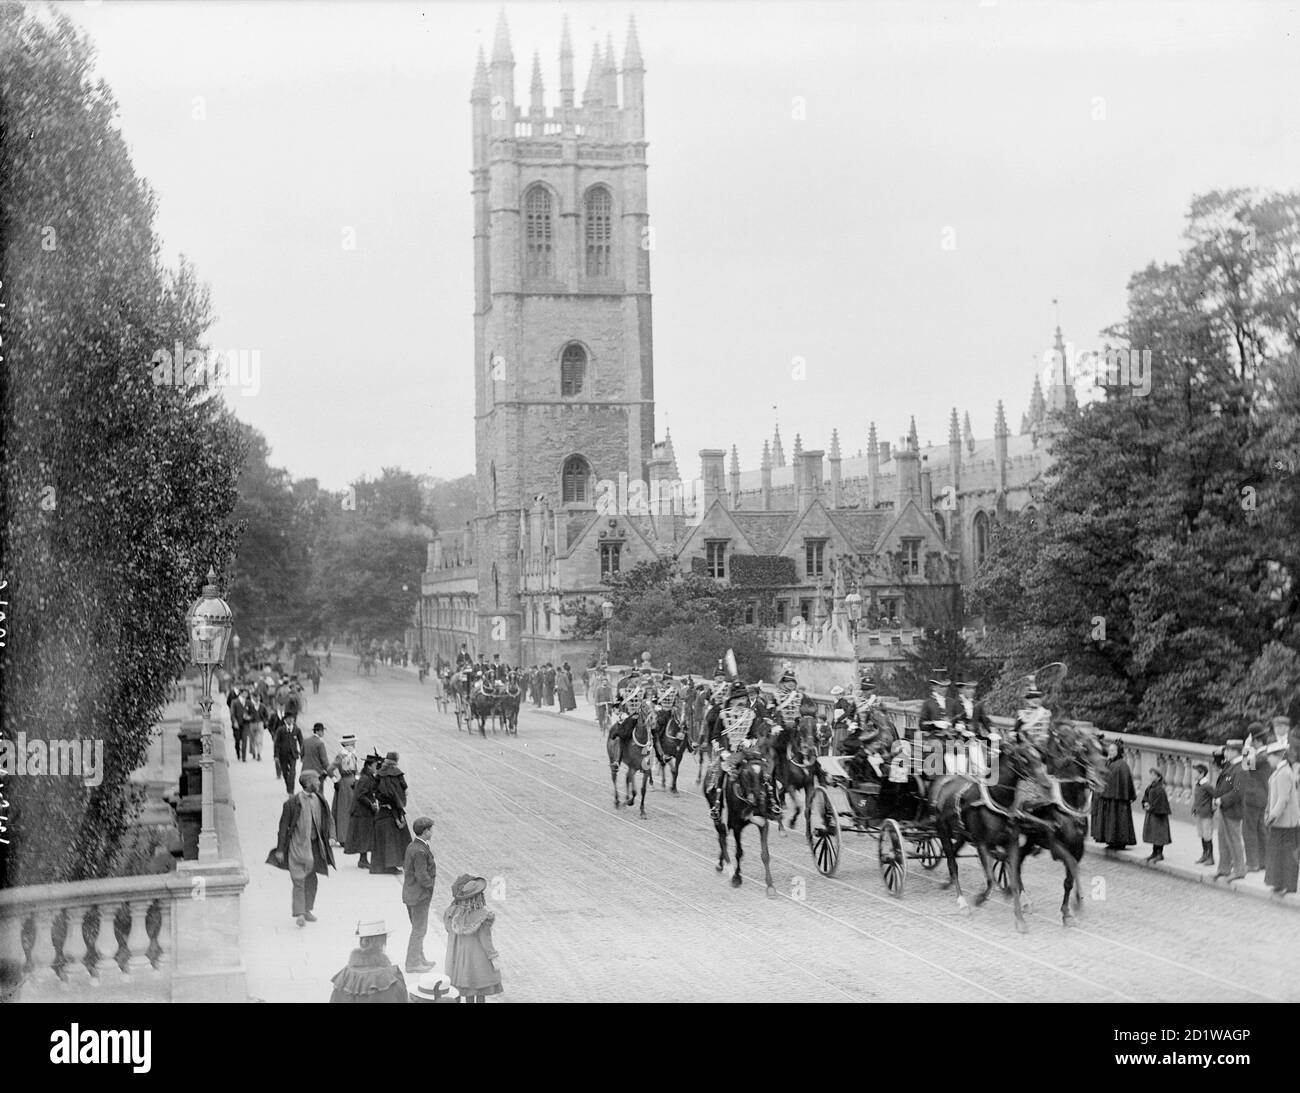 High Street, Oxford, Oxfordshire. A procession of horse drawn carriages and guards passing in front of Magdalen College, watched by onlookers from the pavement. Stock Photo